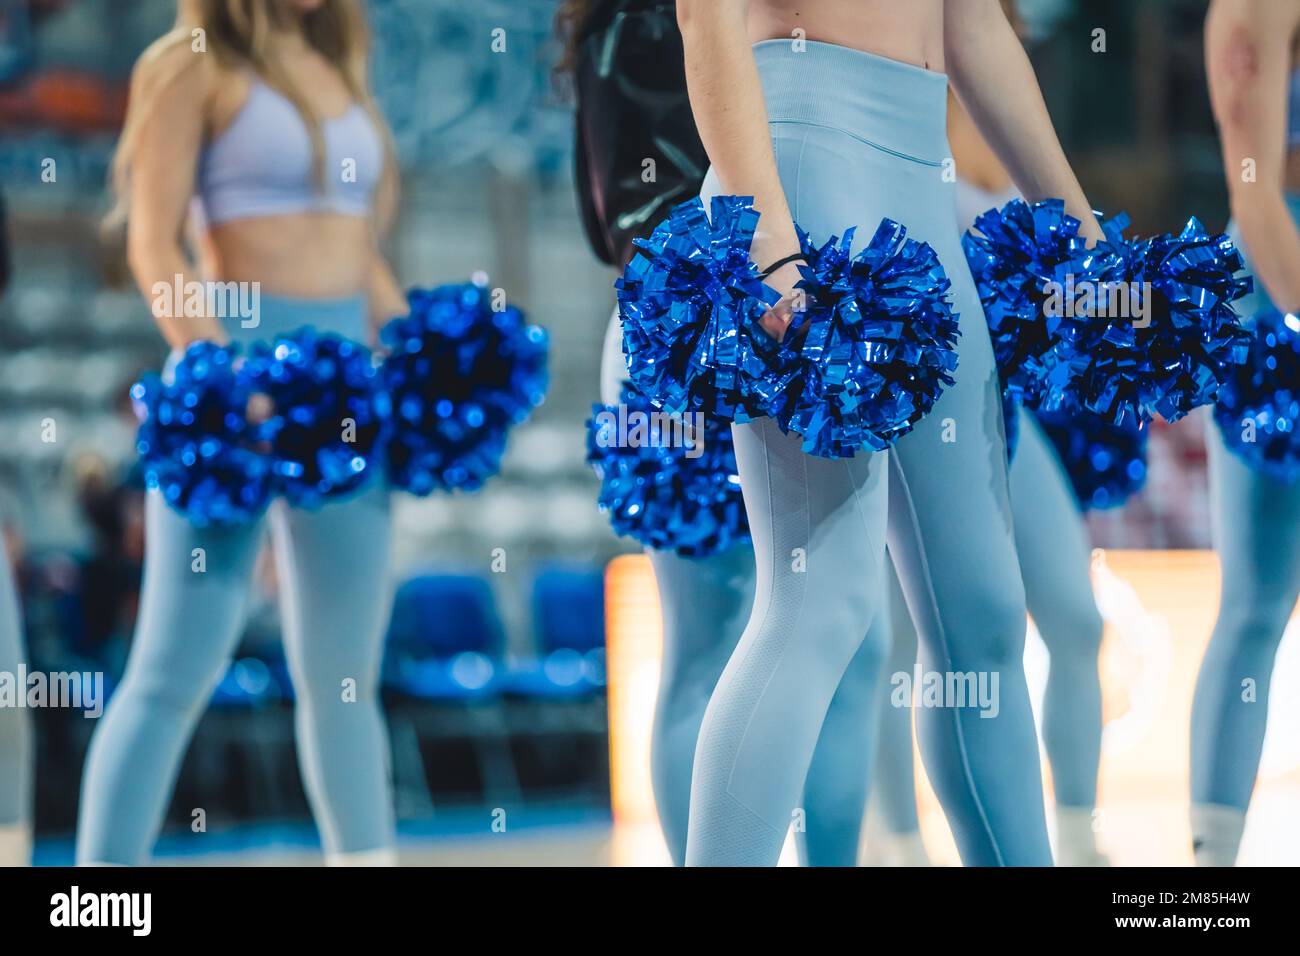 A group of cheerleaders are ready to perform. The cheerleaders are all wearing blue high-waisted tights. Holding pom-poms in their hands adds to the image's energetic and celebratory atmosphere. Stock Photo